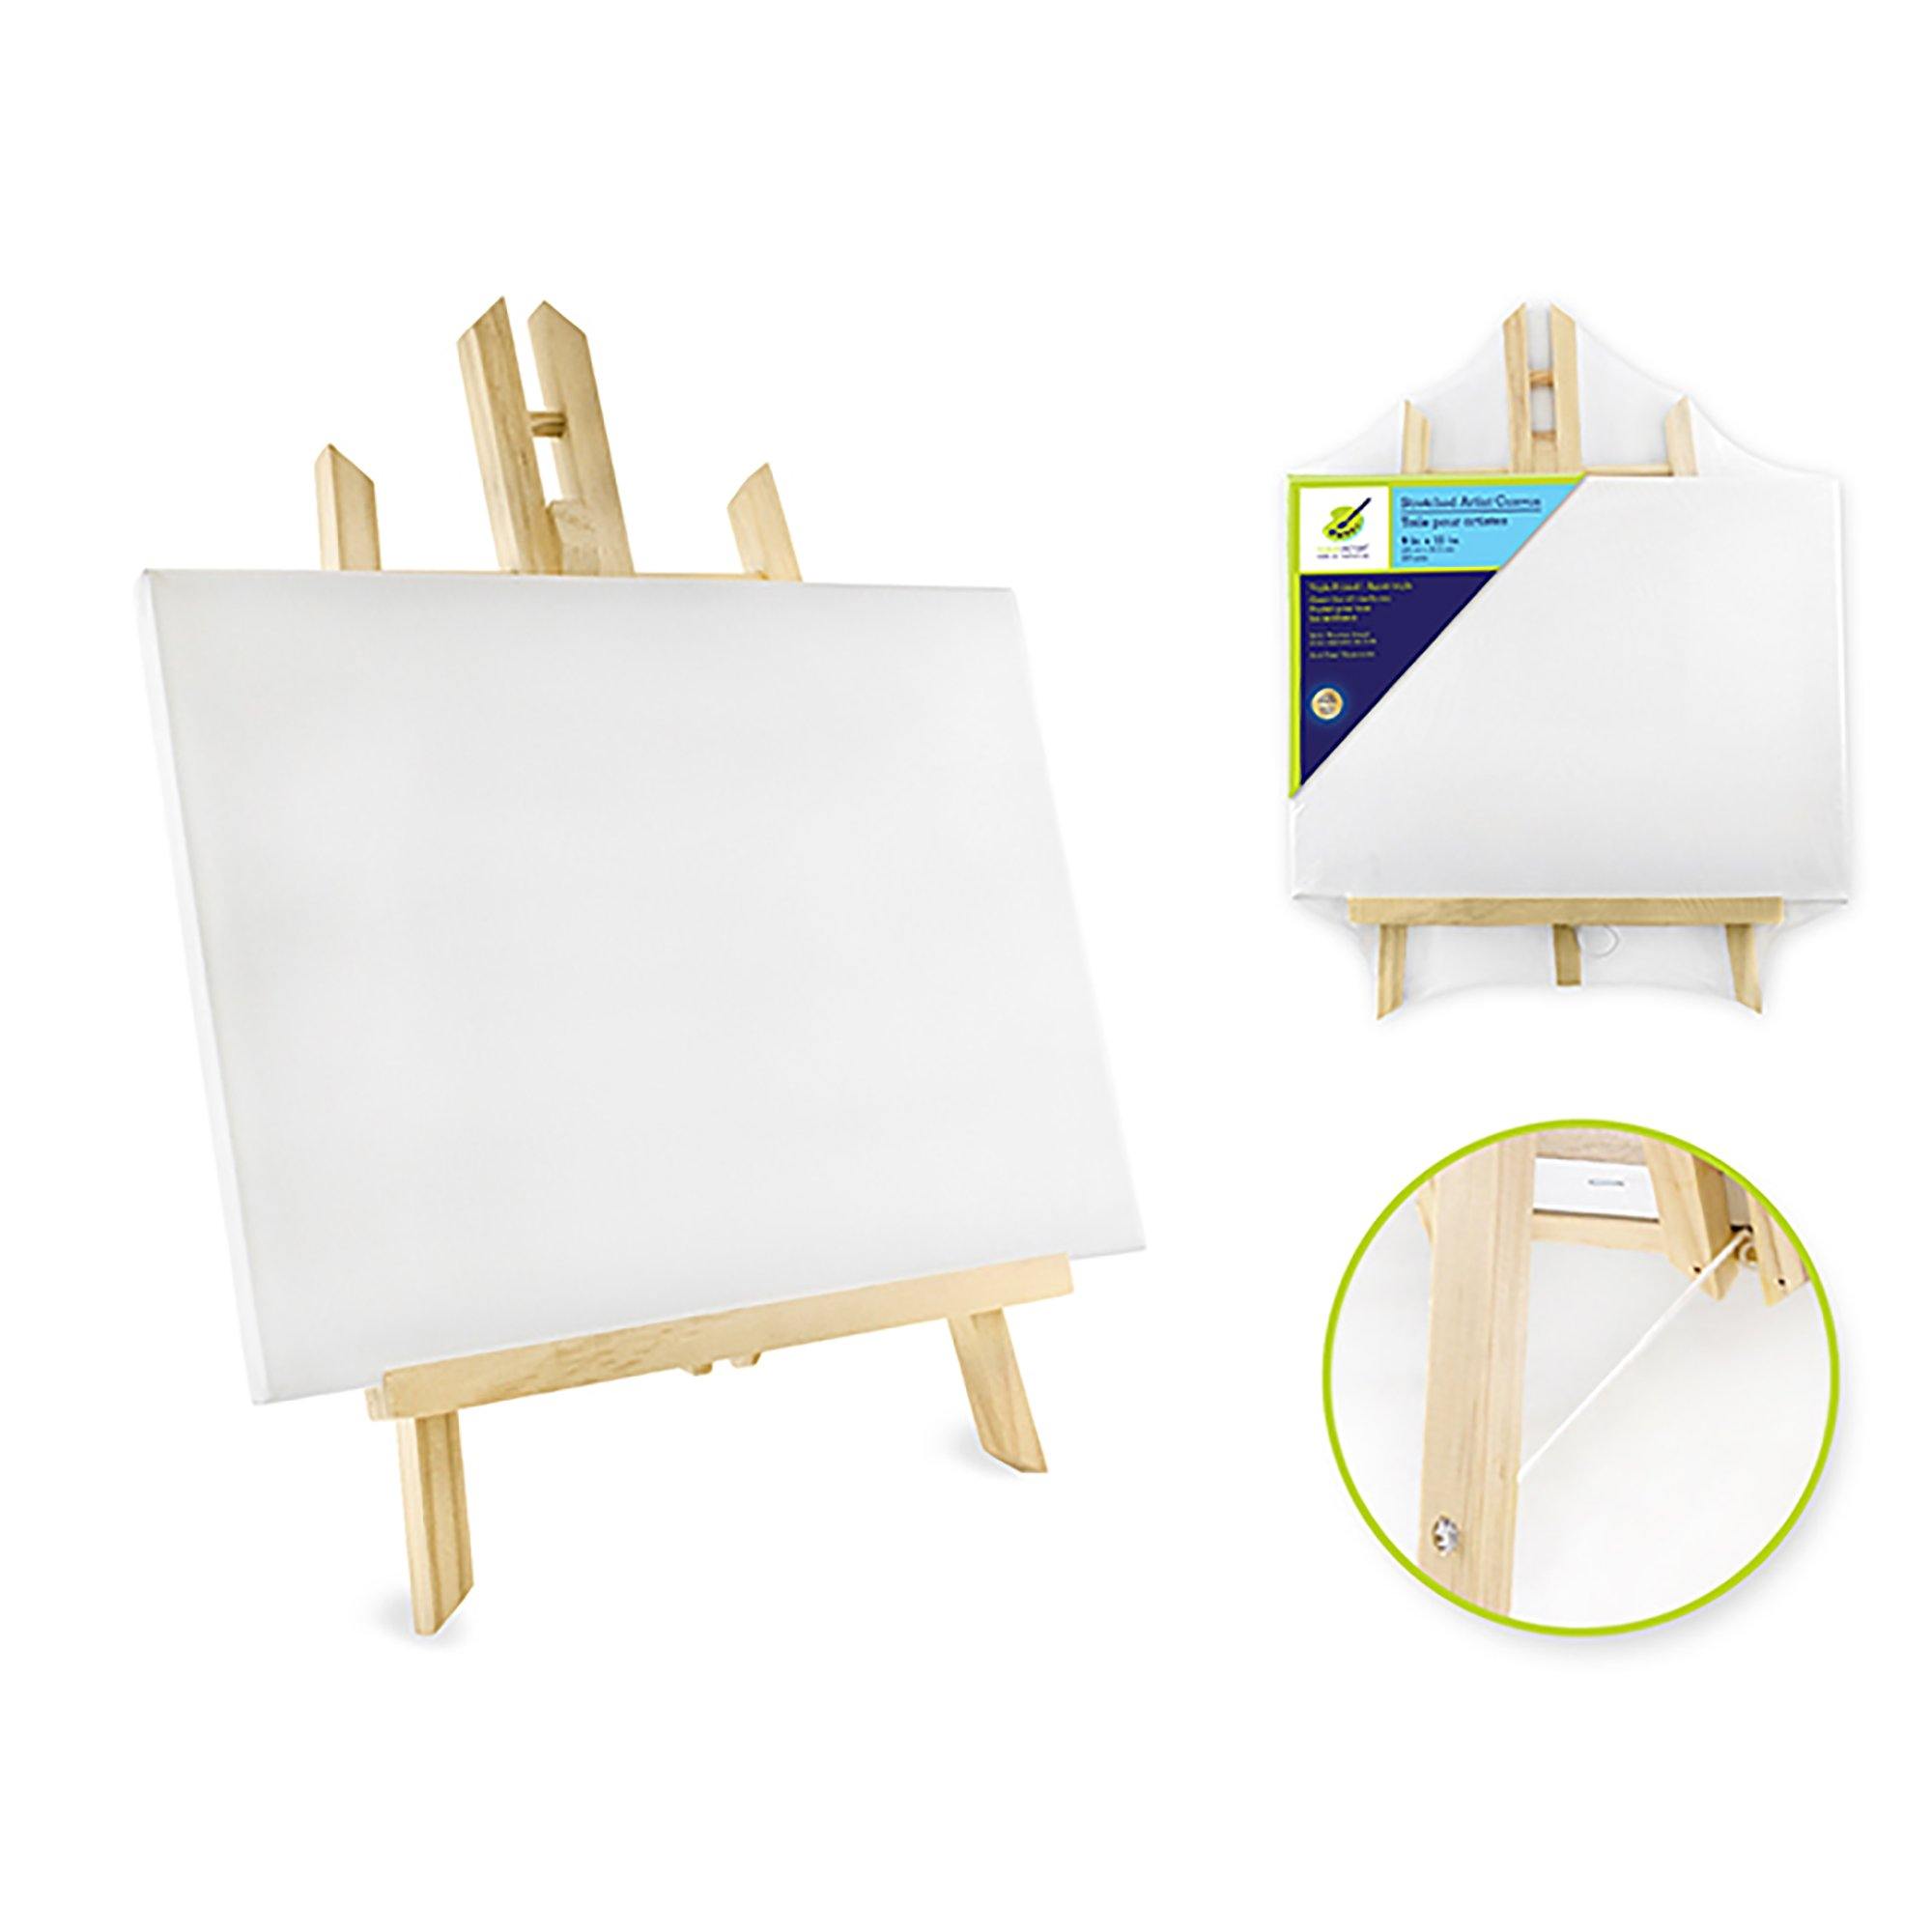 Stretch Artist Canvas: 9"X12" (23X30.5C On Wooden Easel Painting Canvas - Dollar Max Dépôt